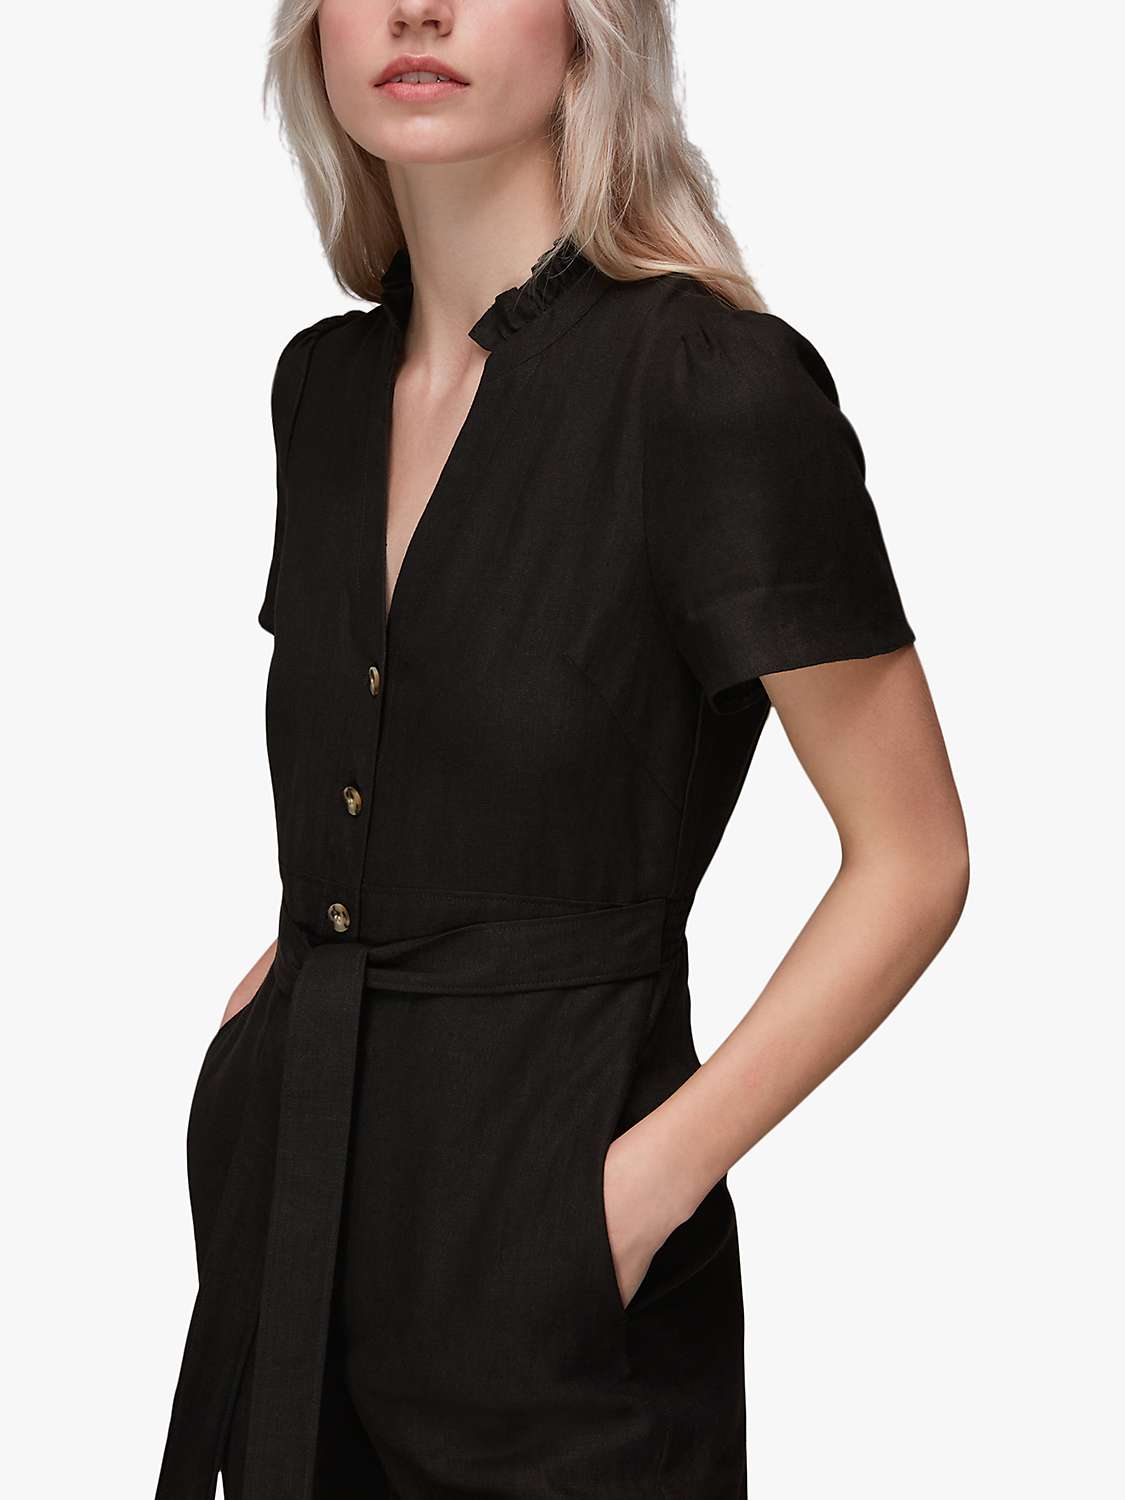 Buy Whistles Emmie Cropped Linen Jumpsuit Online at johnlewis.com